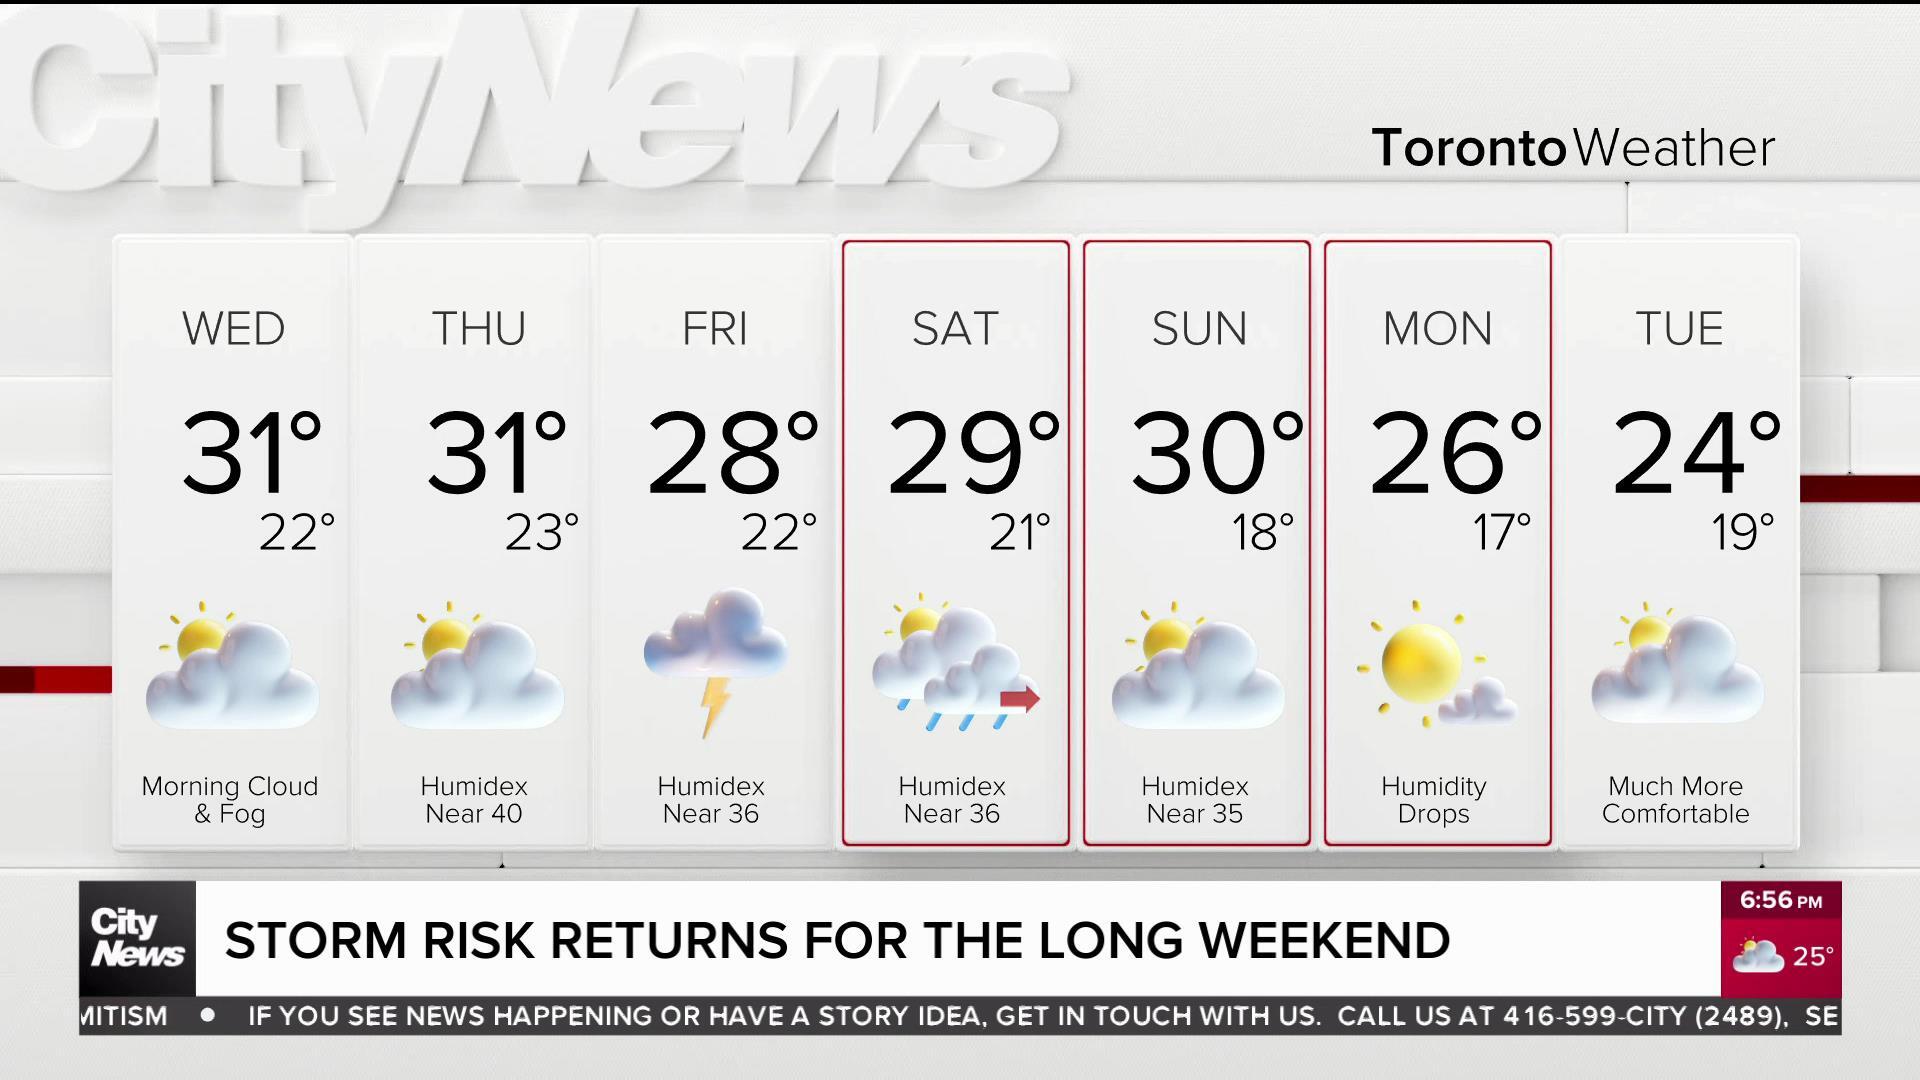 Storm risk returns for the long weekend